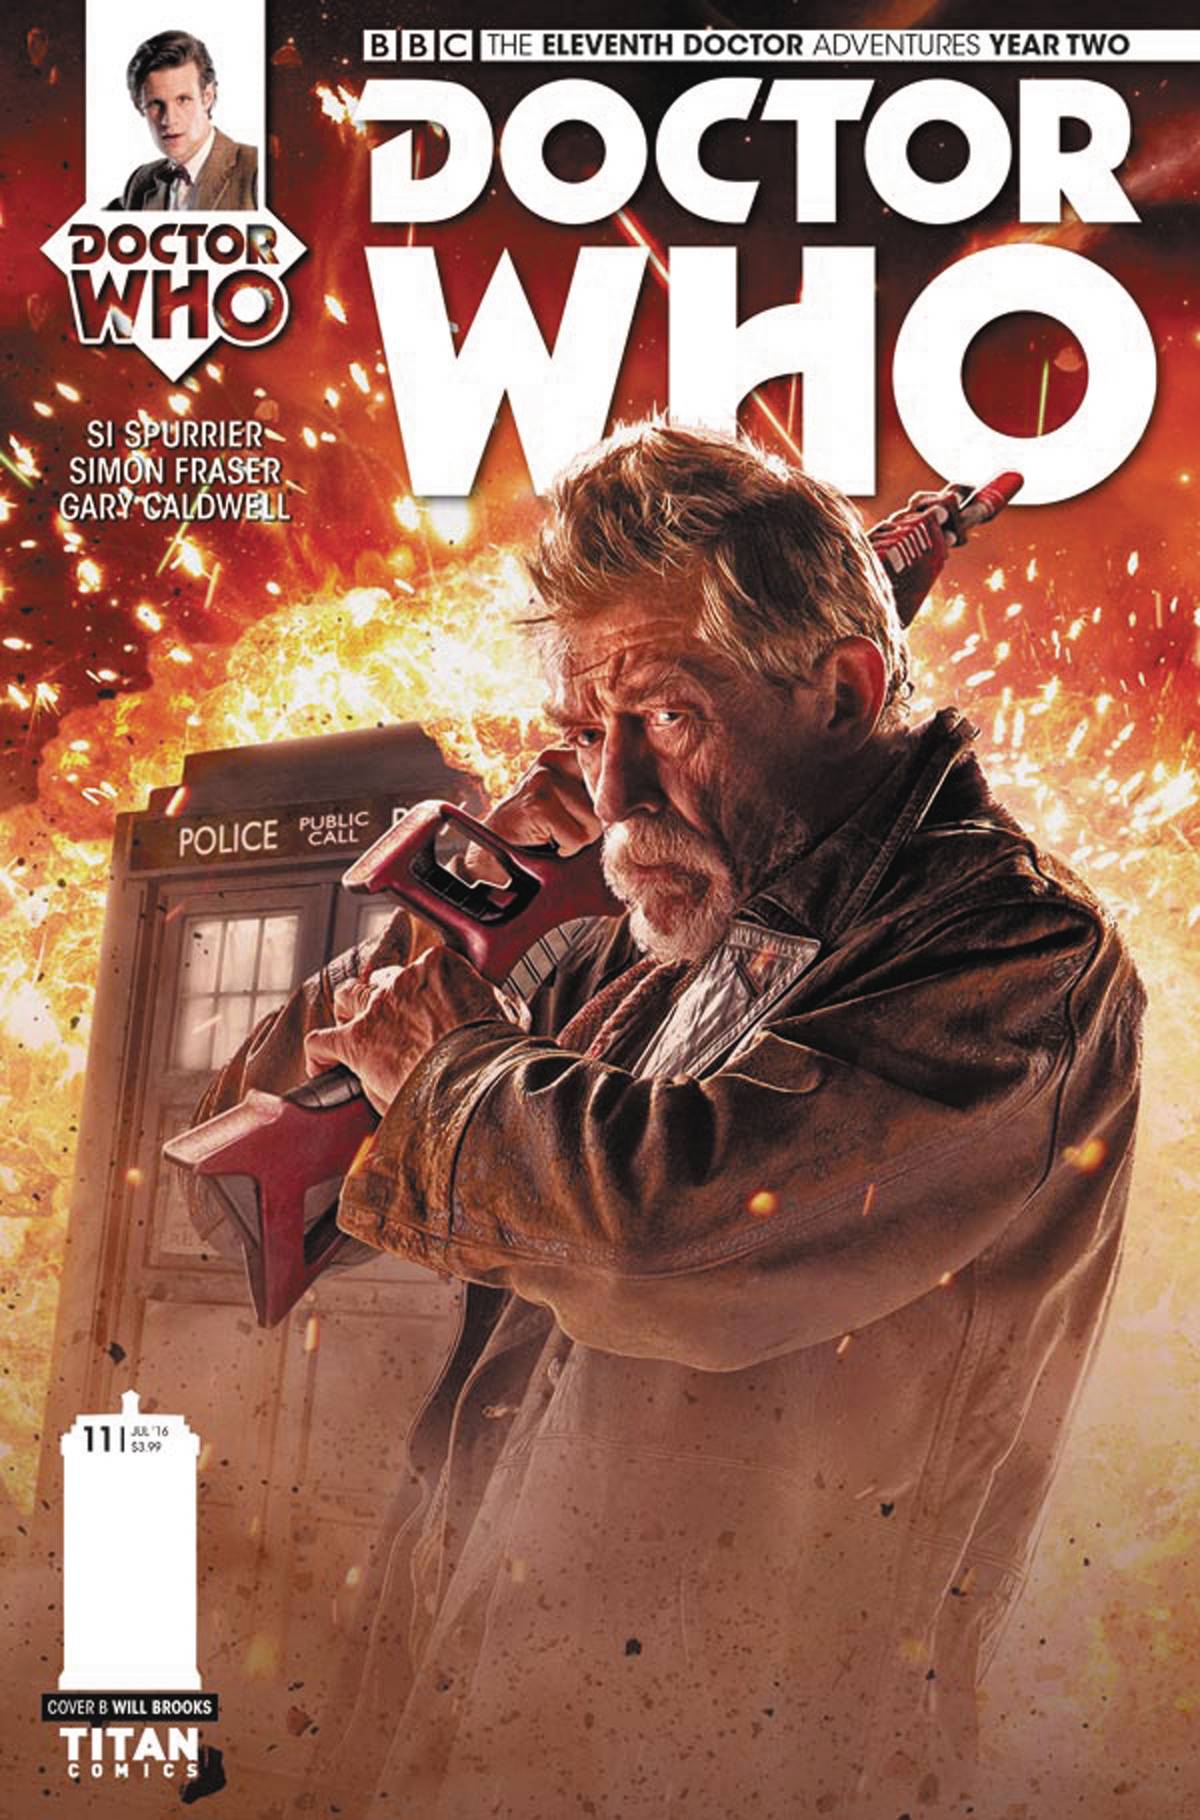 Doctor Who 11th Year Two #11 Cover B Photo